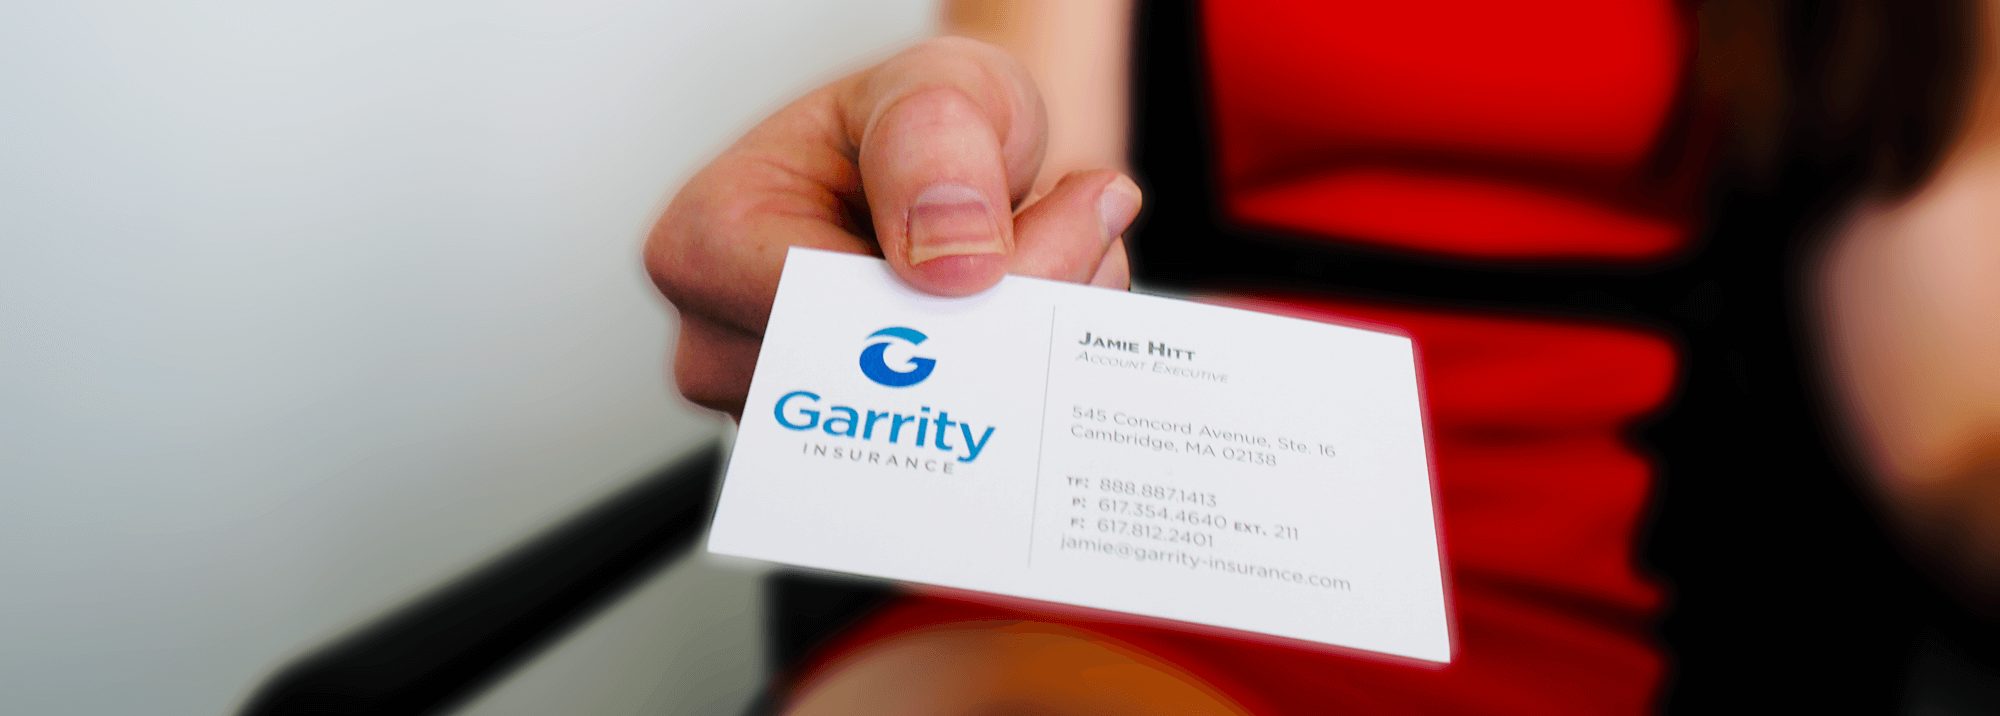 Our Carriers | Garrity Insurance Agency